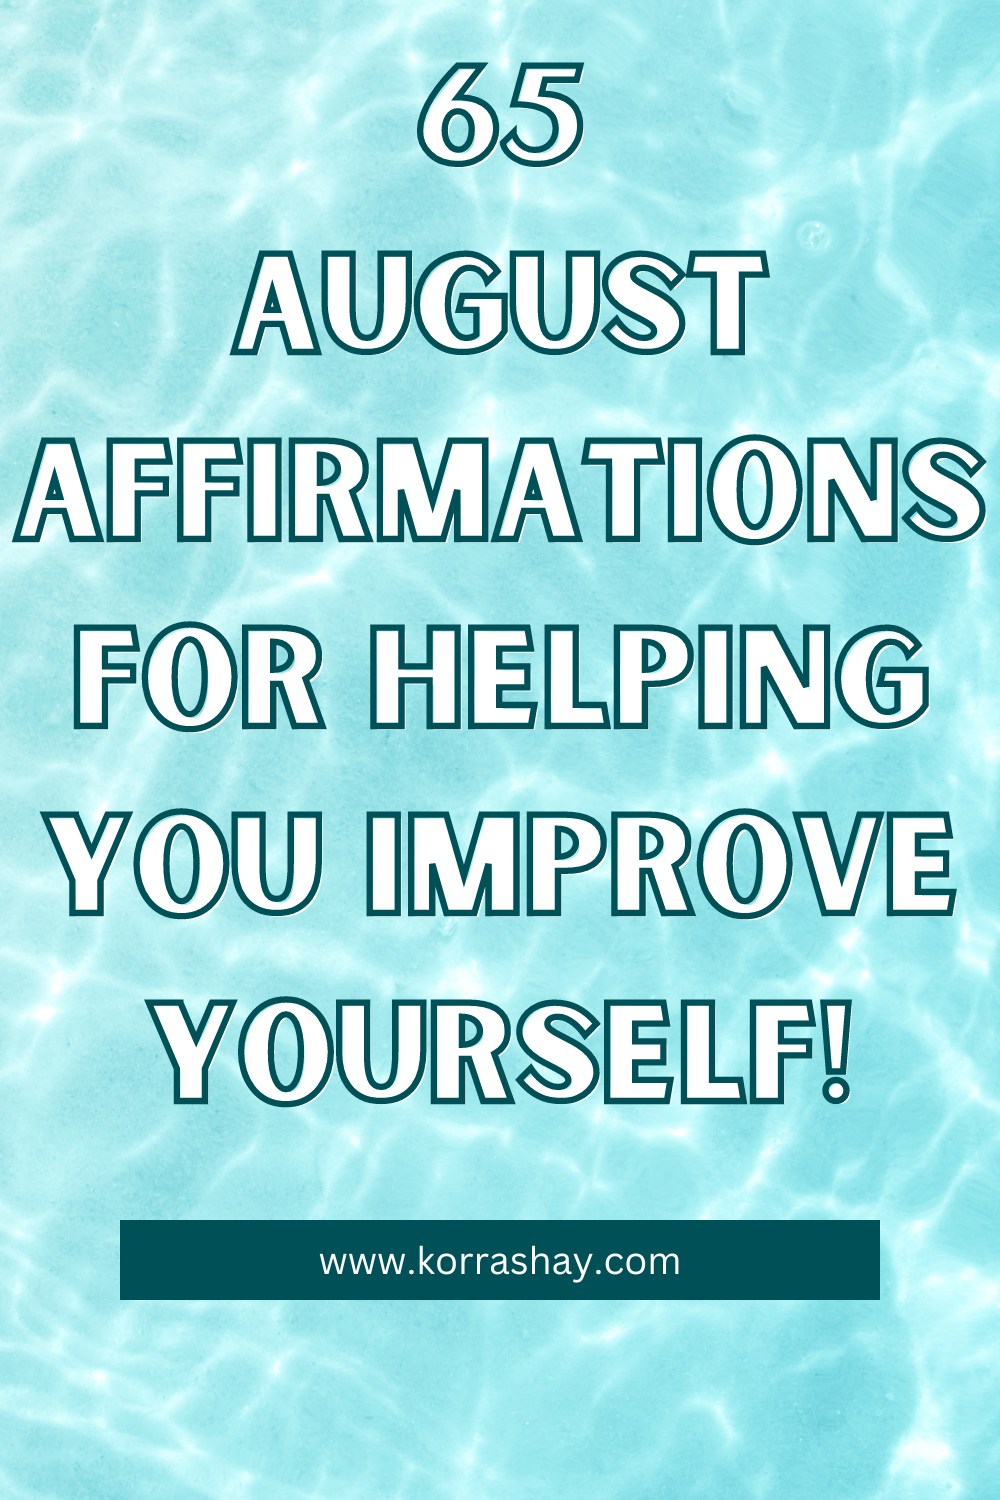 65 August Affirmations For Helping You Improve Yourself!